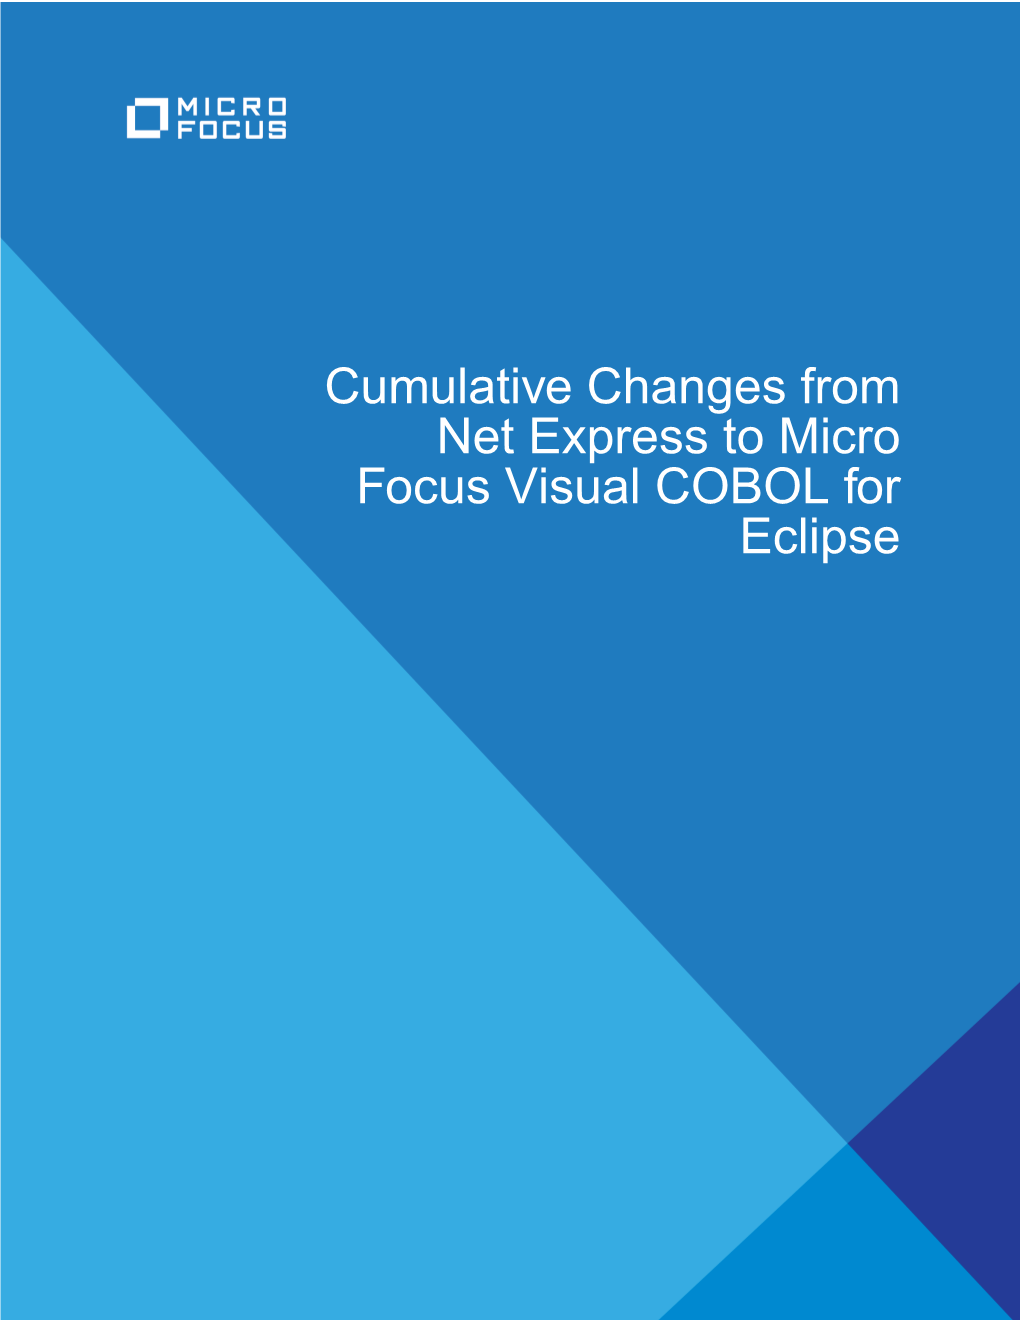 Cumulative Changes from Net Express to Visual COBOL for Eclipse